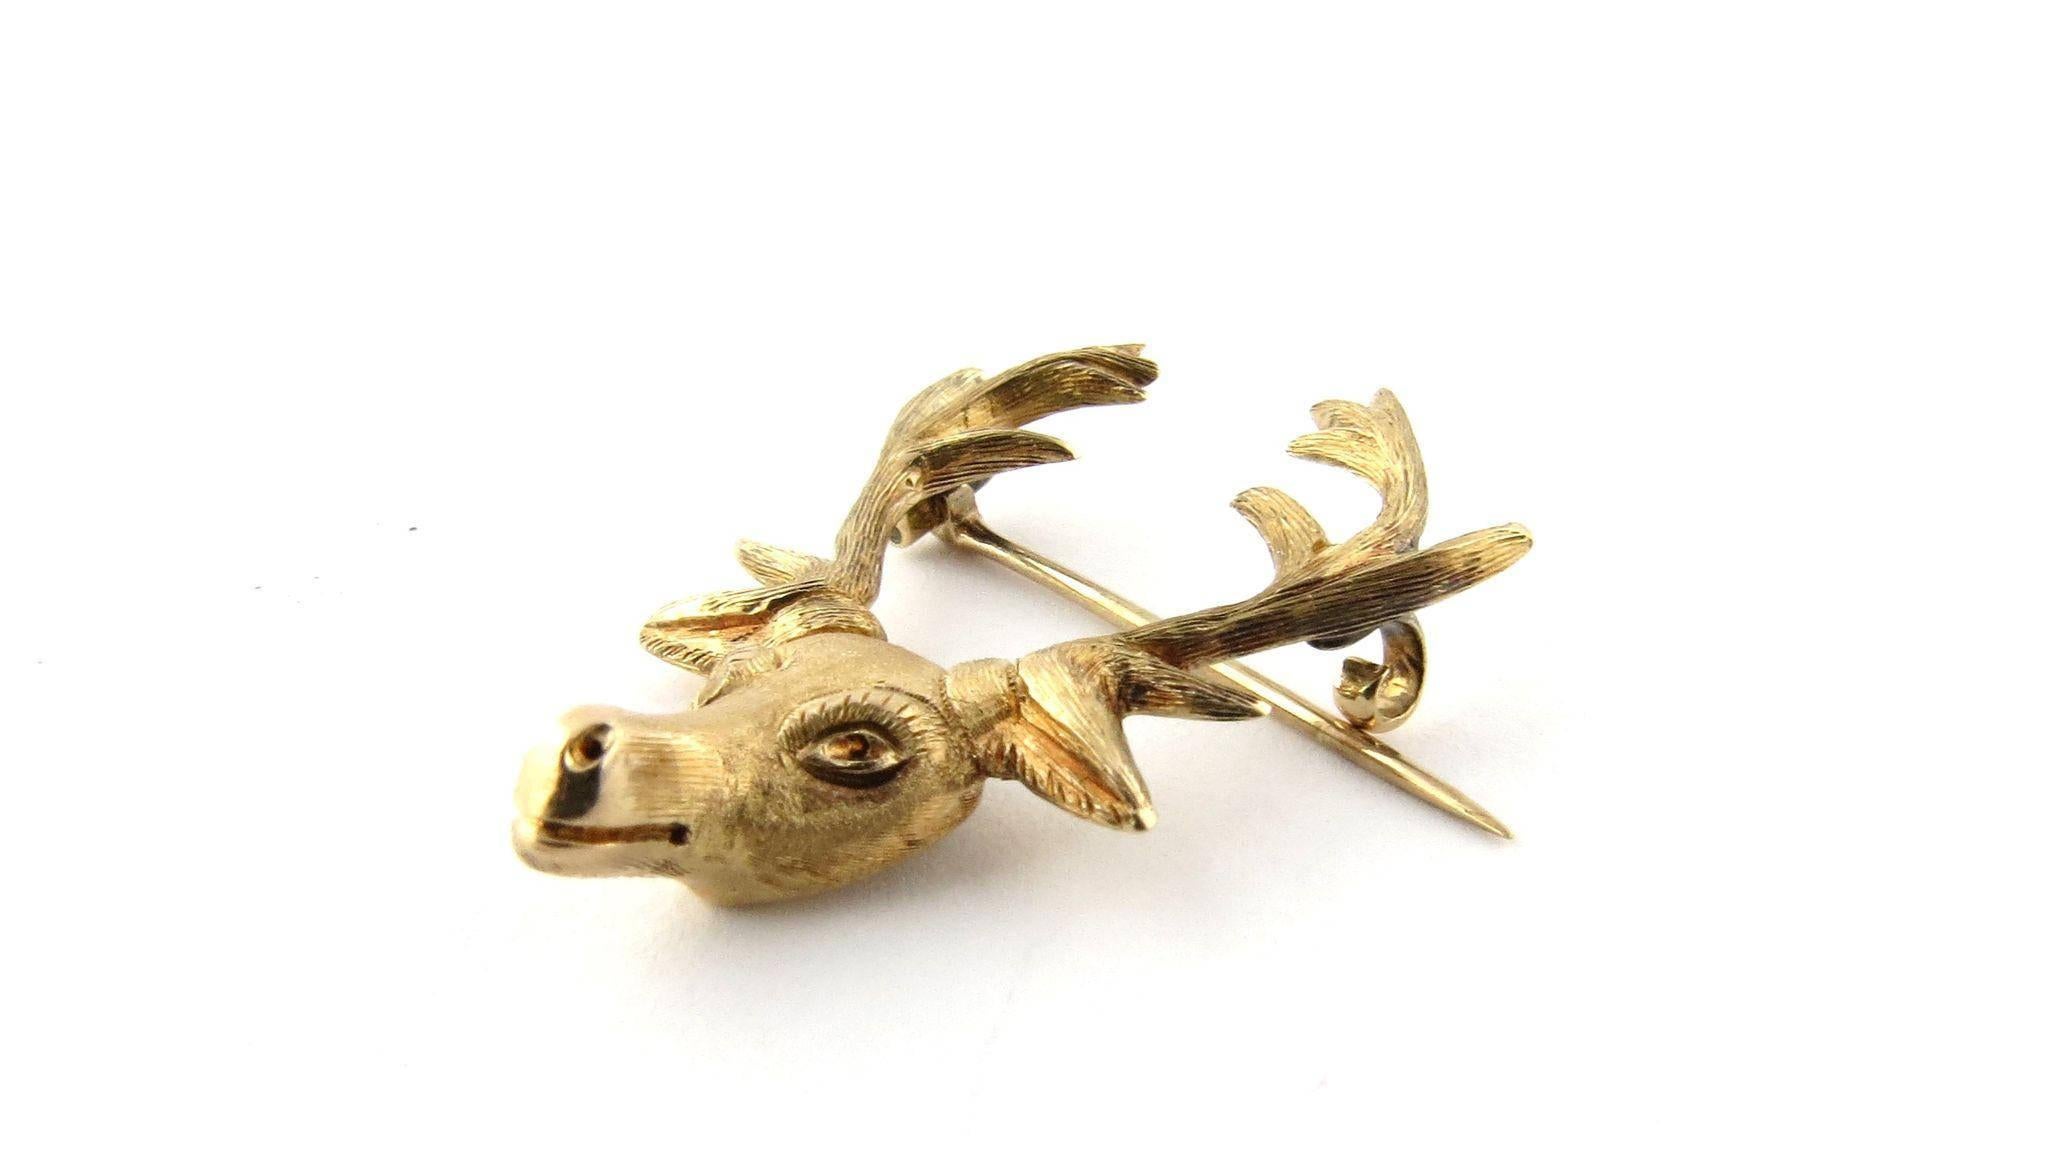 Vintage Textured 14K Yellow Gold Stag Head Pin. 

Narrow nosed matted deer head with lined antlers and eyelashes make this an interesting piece. Curled C clasp on back holds the pin in place. 

Tested for purity and stamped 14K. Weighs 3.9g, 2.5dwt